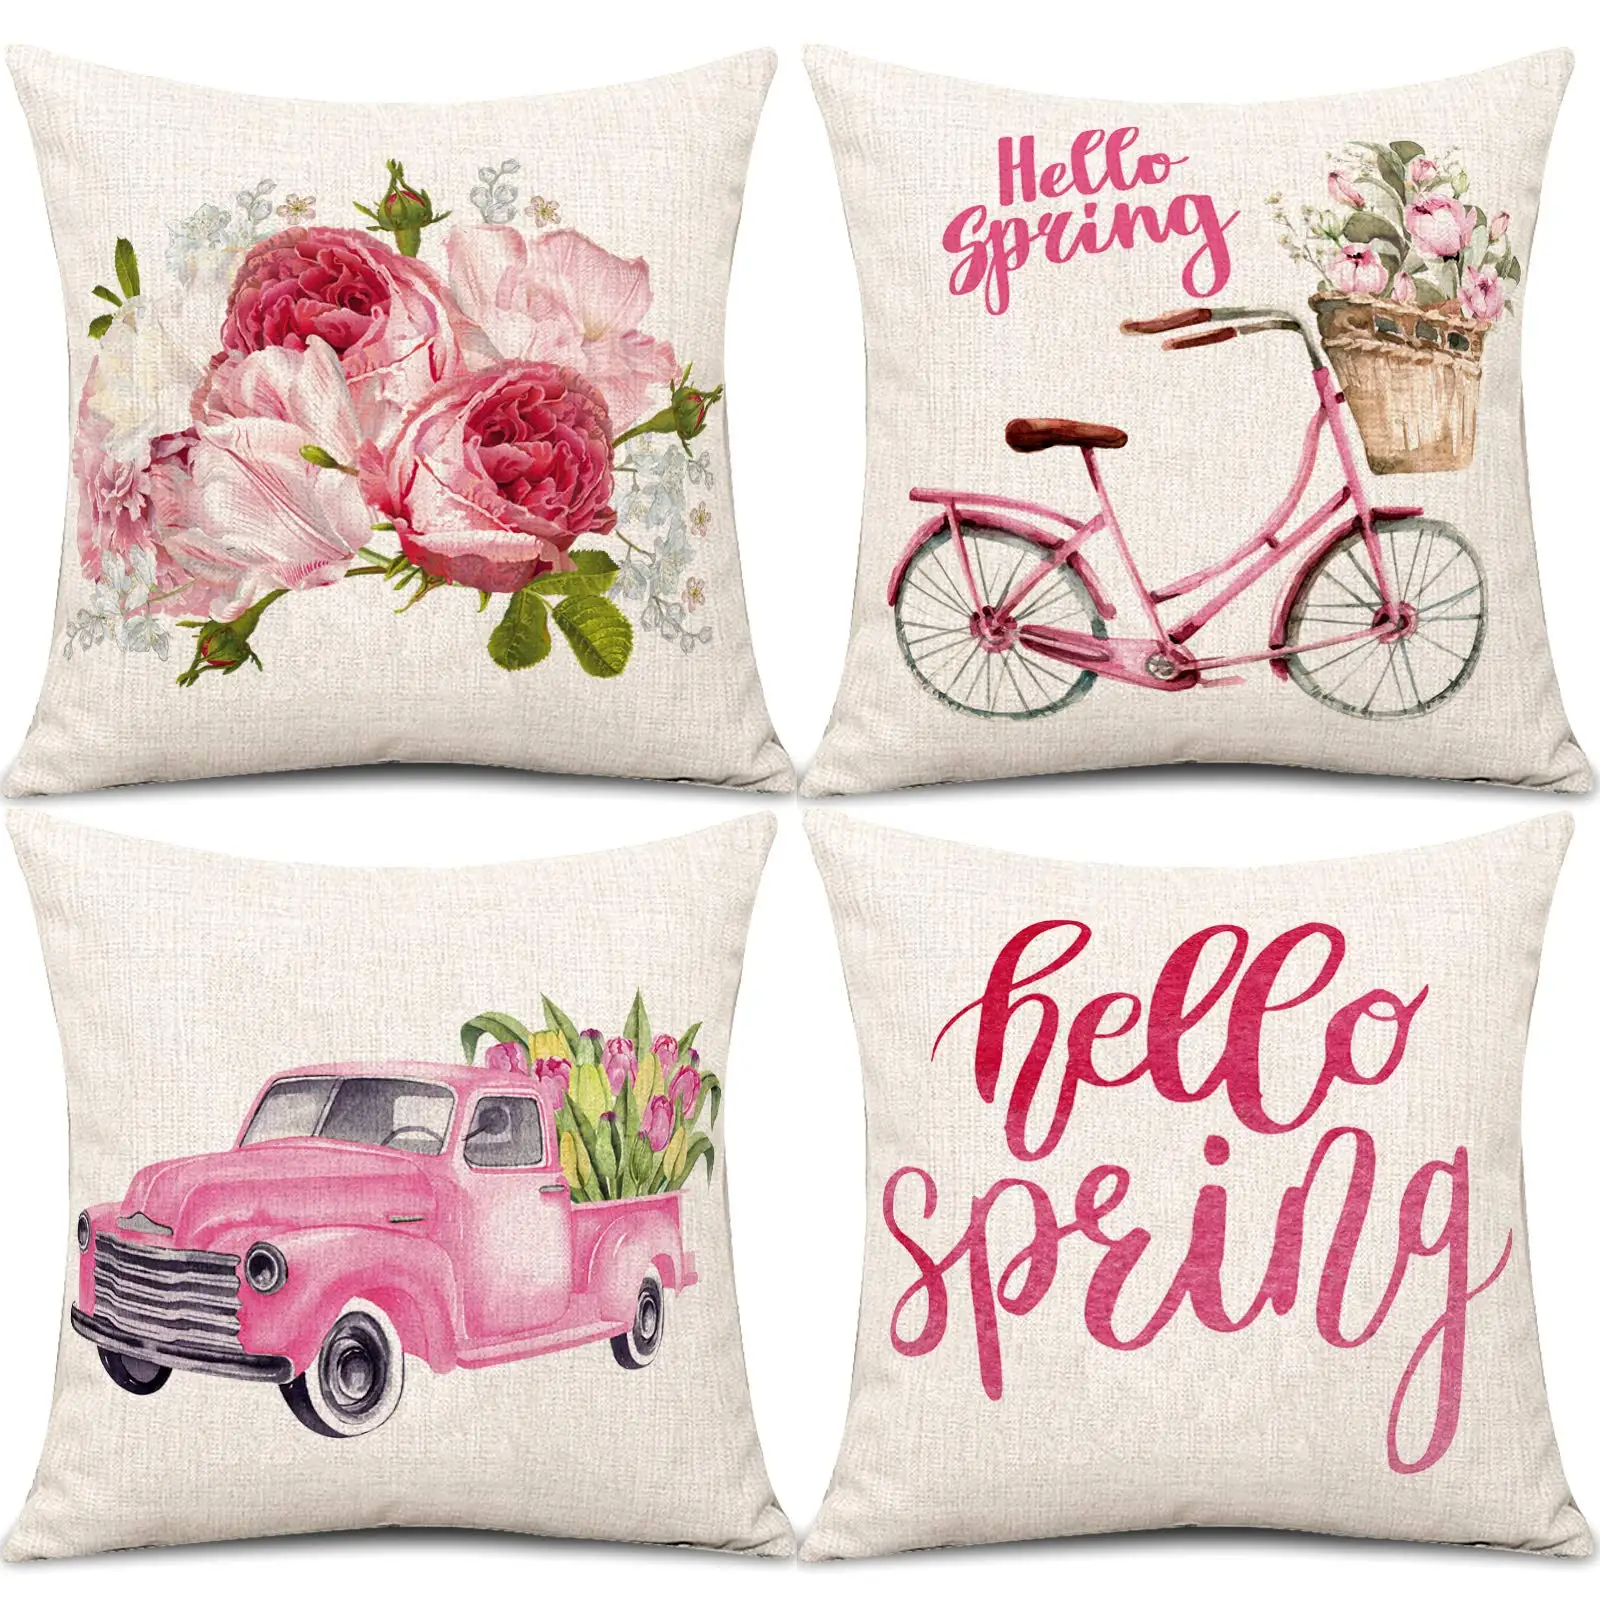 

Valentine's Day pink printed linen pillowcase sofa cushion cover home decoration can be customized for you 40x40 50x50 60x60